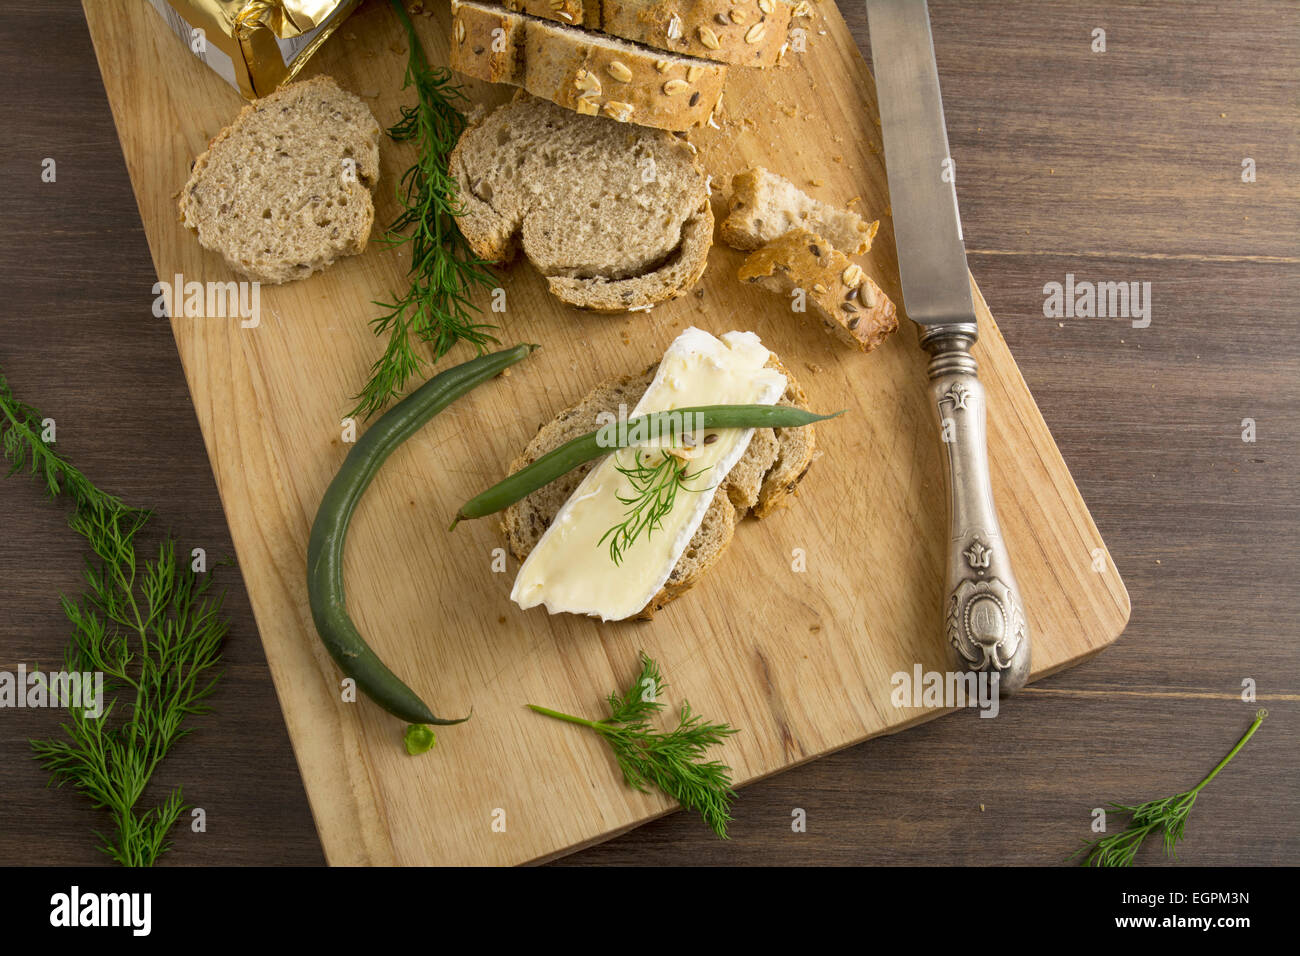 bread served with chesse brie, on wooden board Stock Photo